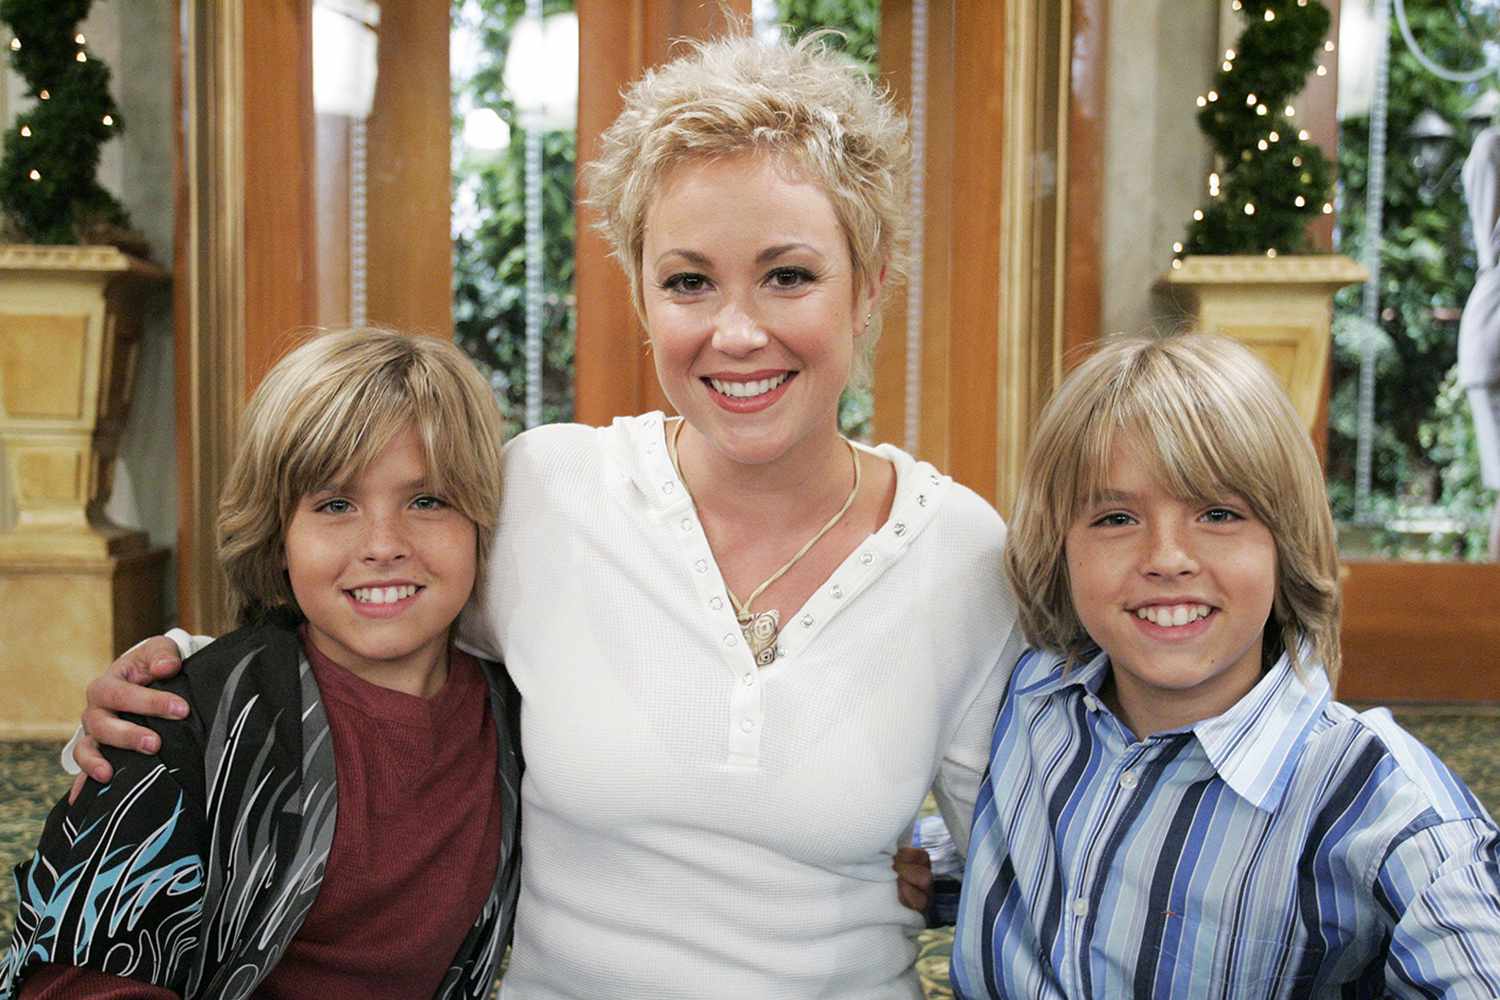 The Suite Life of Zack & Cody cast looking happy here
